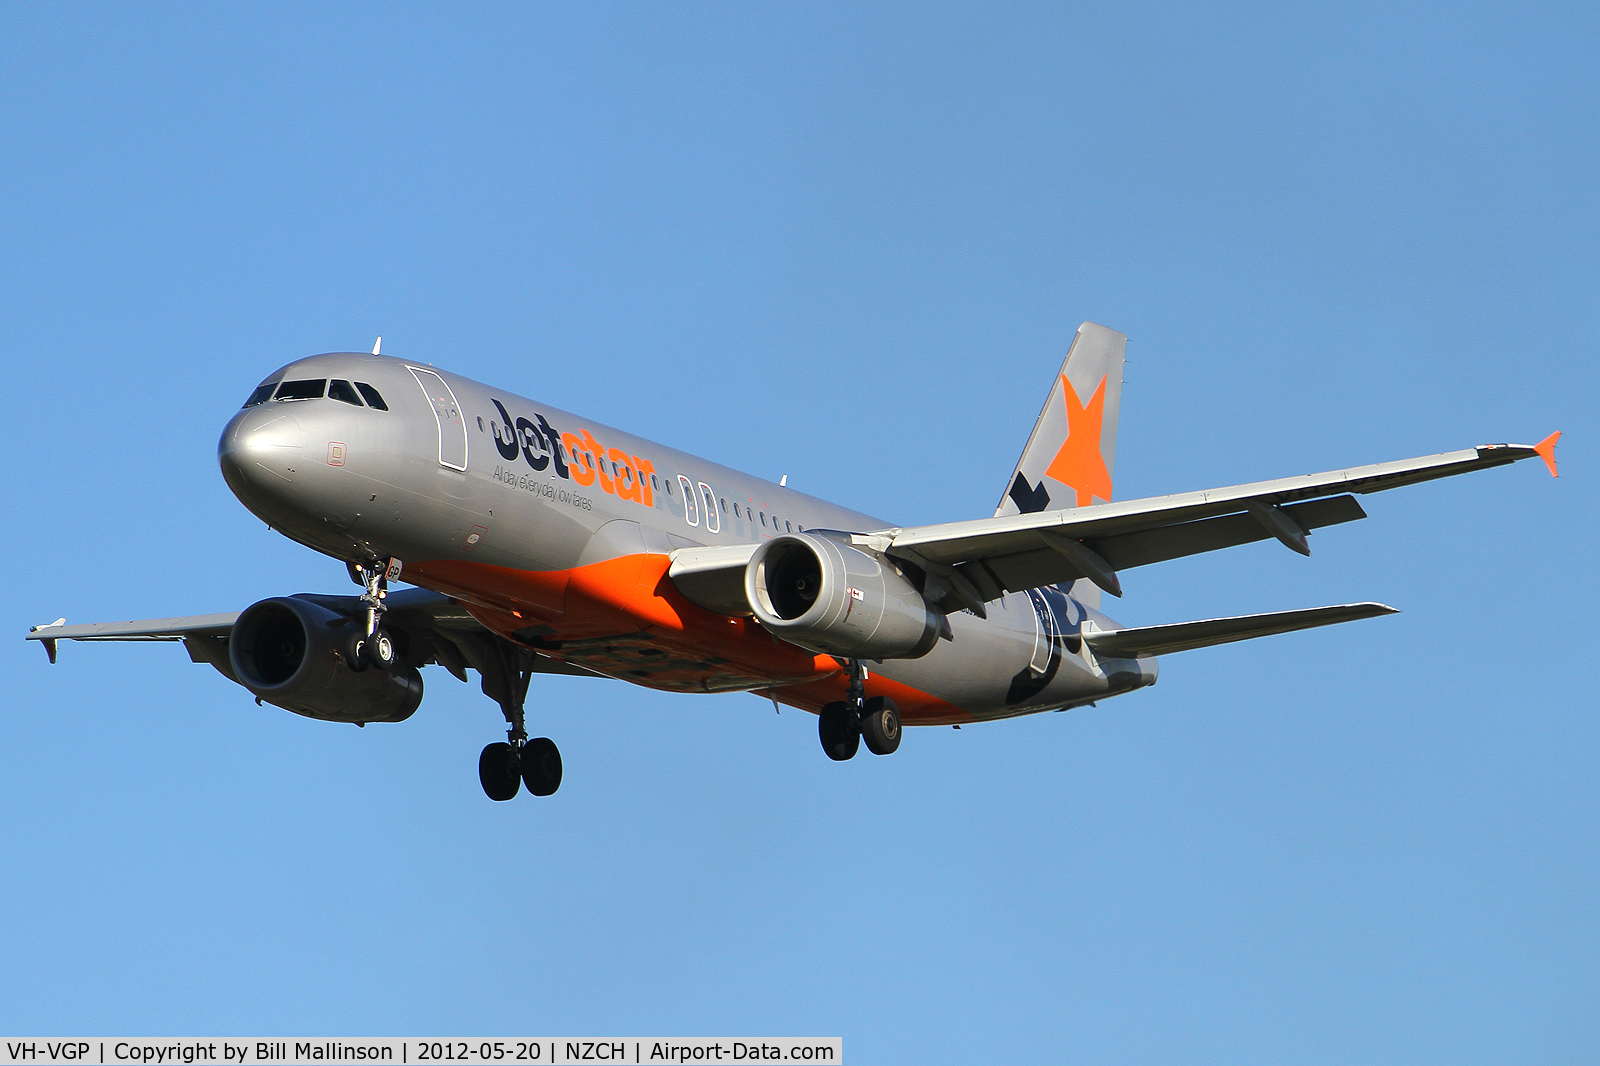 VH-VGP, 2010 Airbus A320-232 C/N 4343, finals to 02